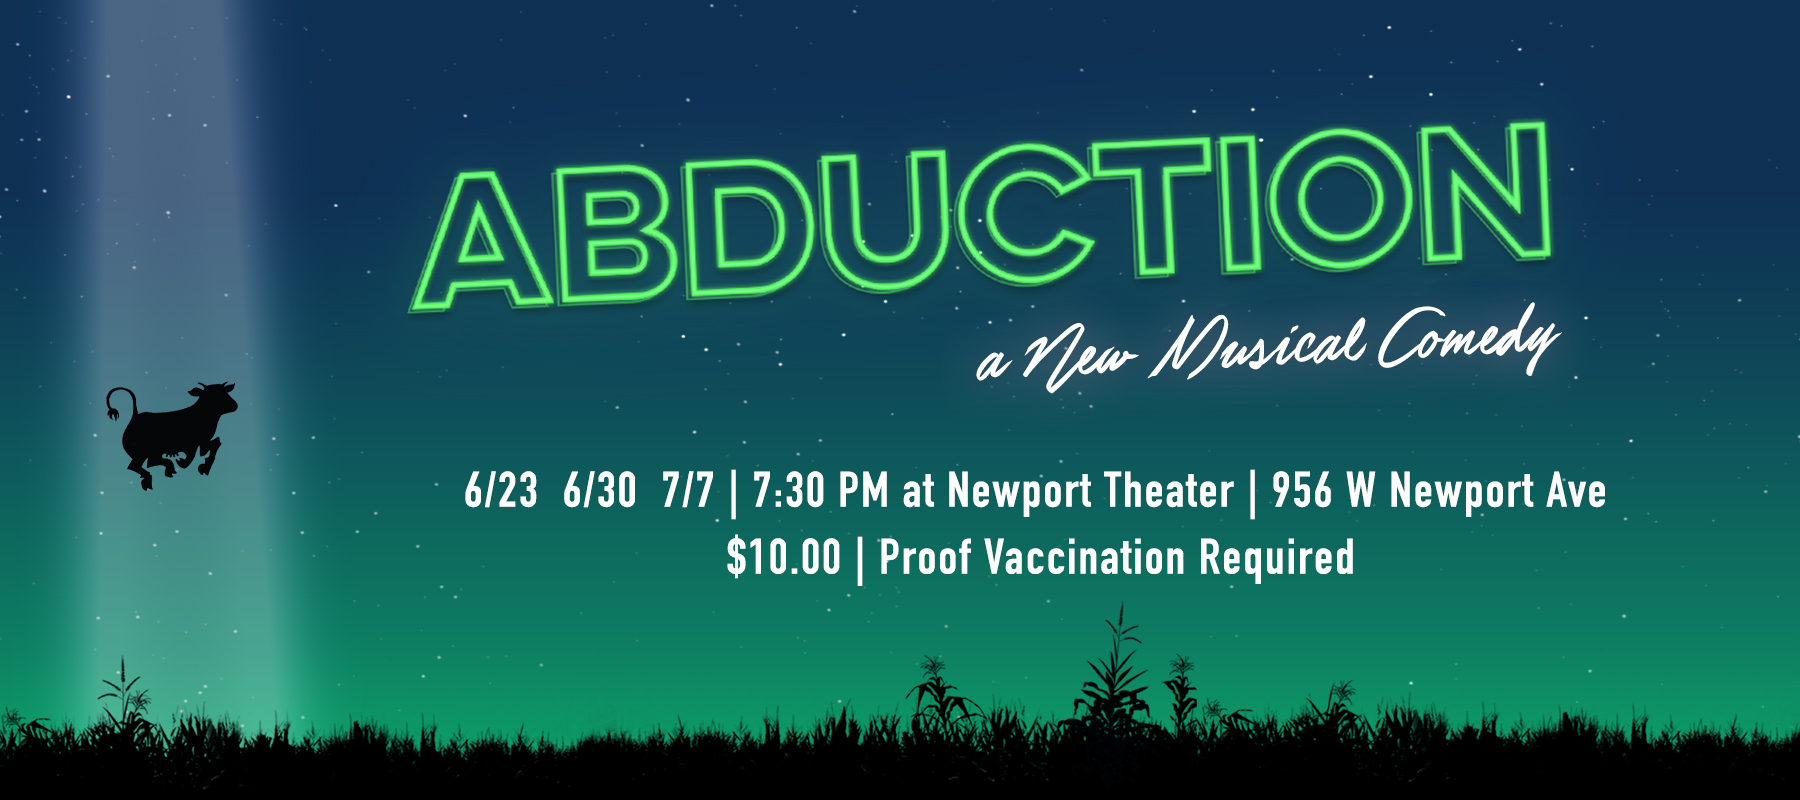 ABDUCTION: A New Comedy Musical